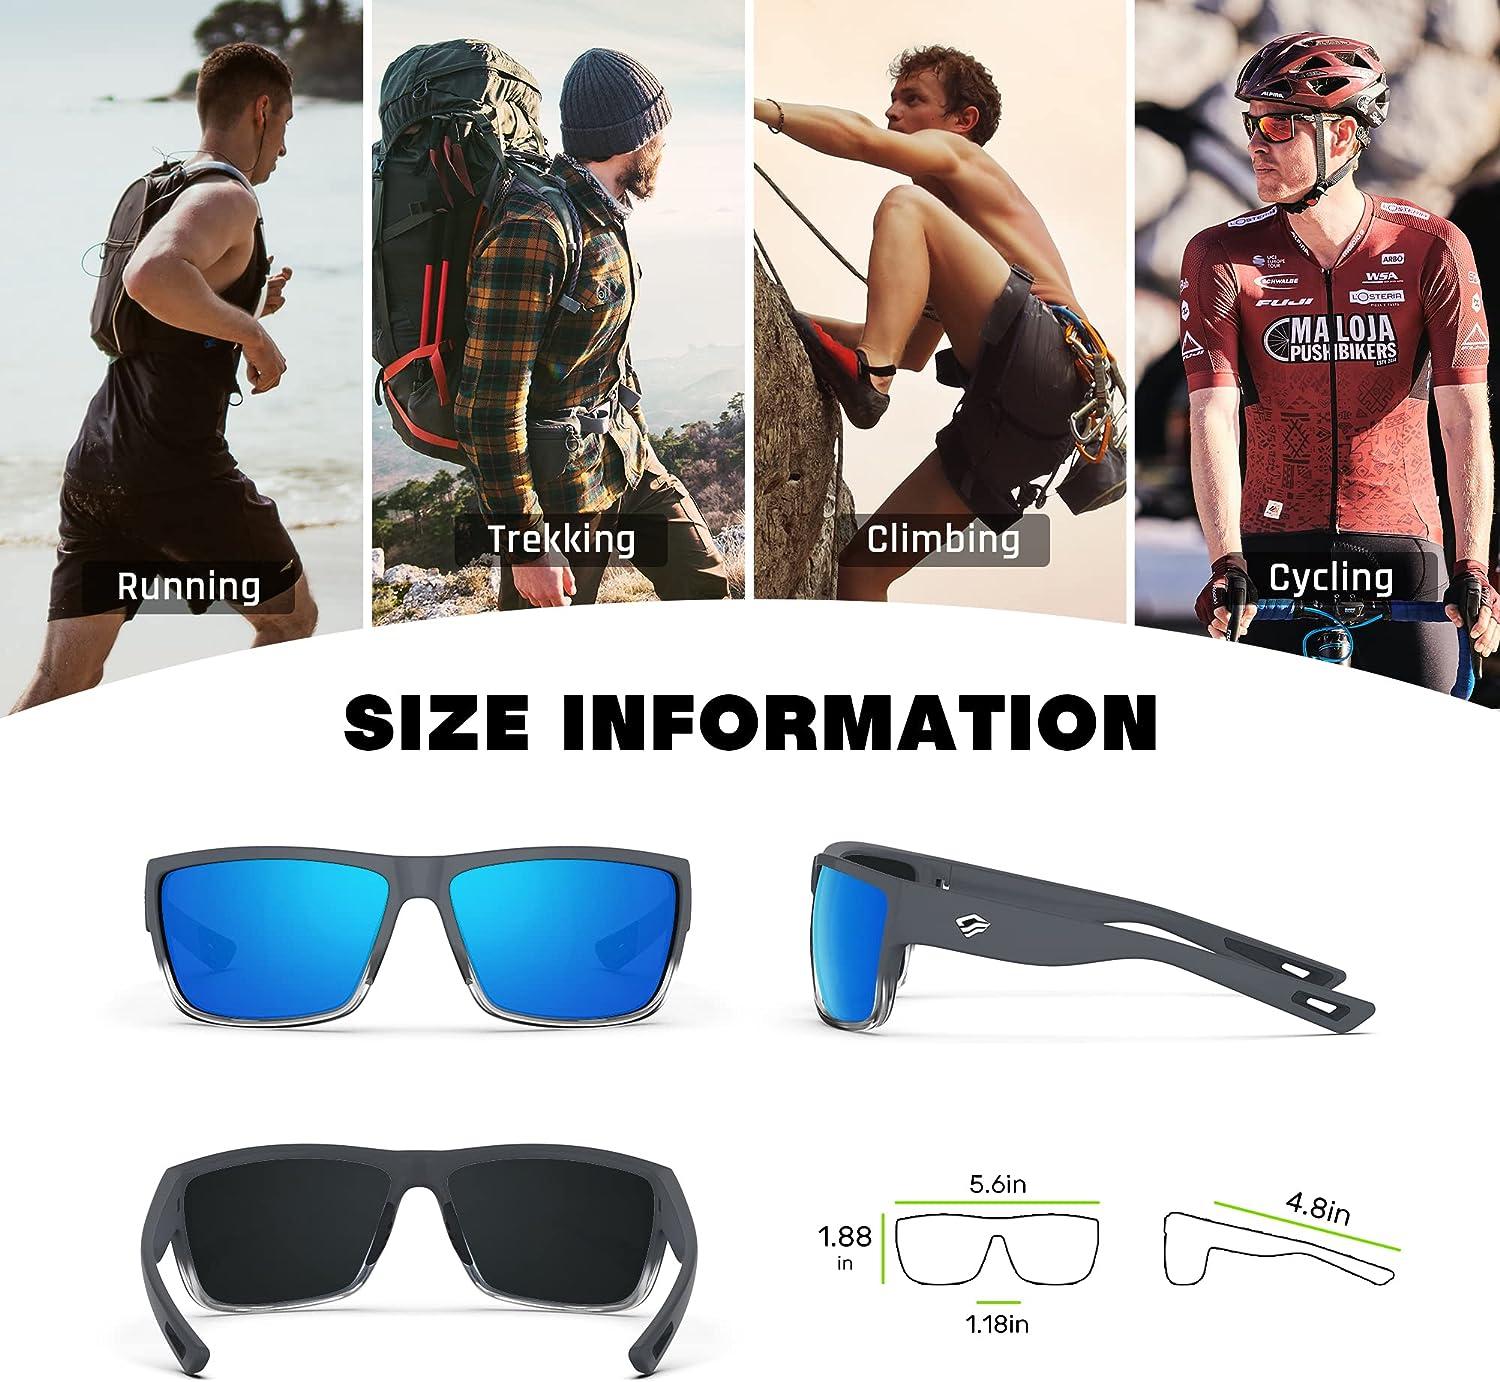 TOREGE Polarized Sports Sunglasses for Men and Women Cycling